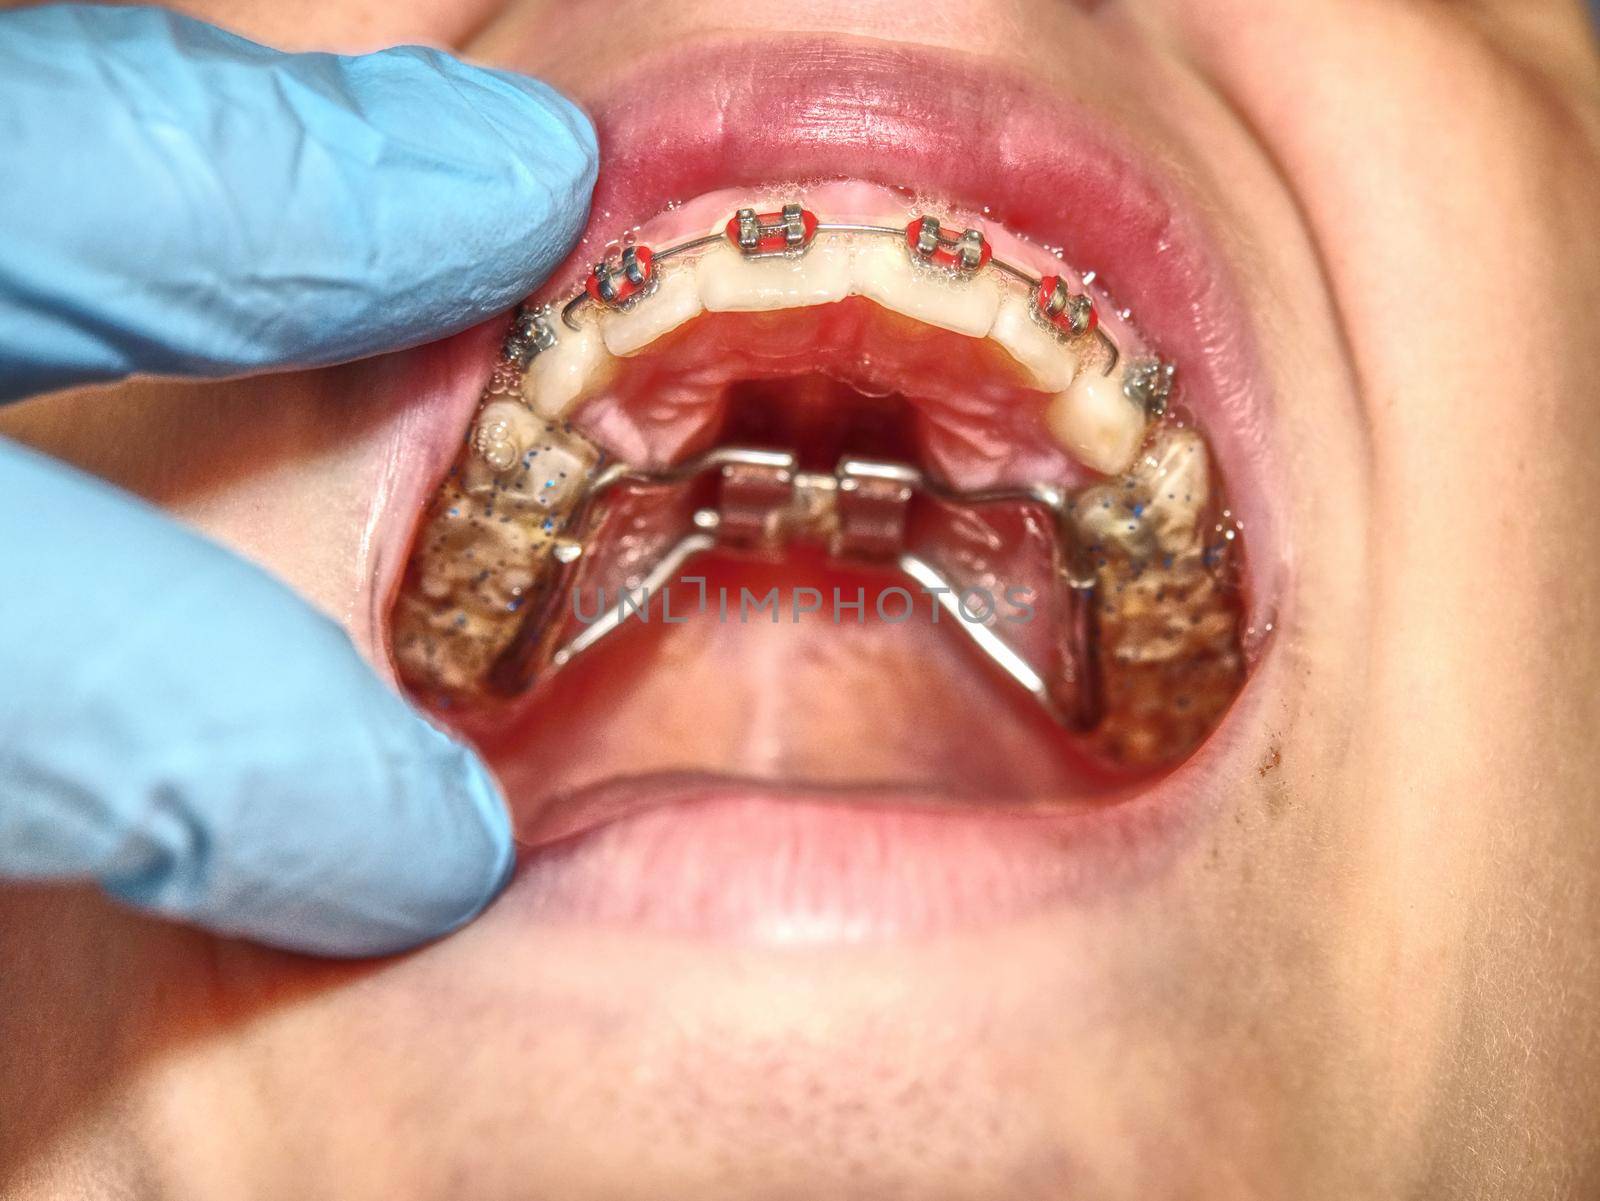 Patient with  dental braces during check or  treatment, dental mirror dentist tools side view. 